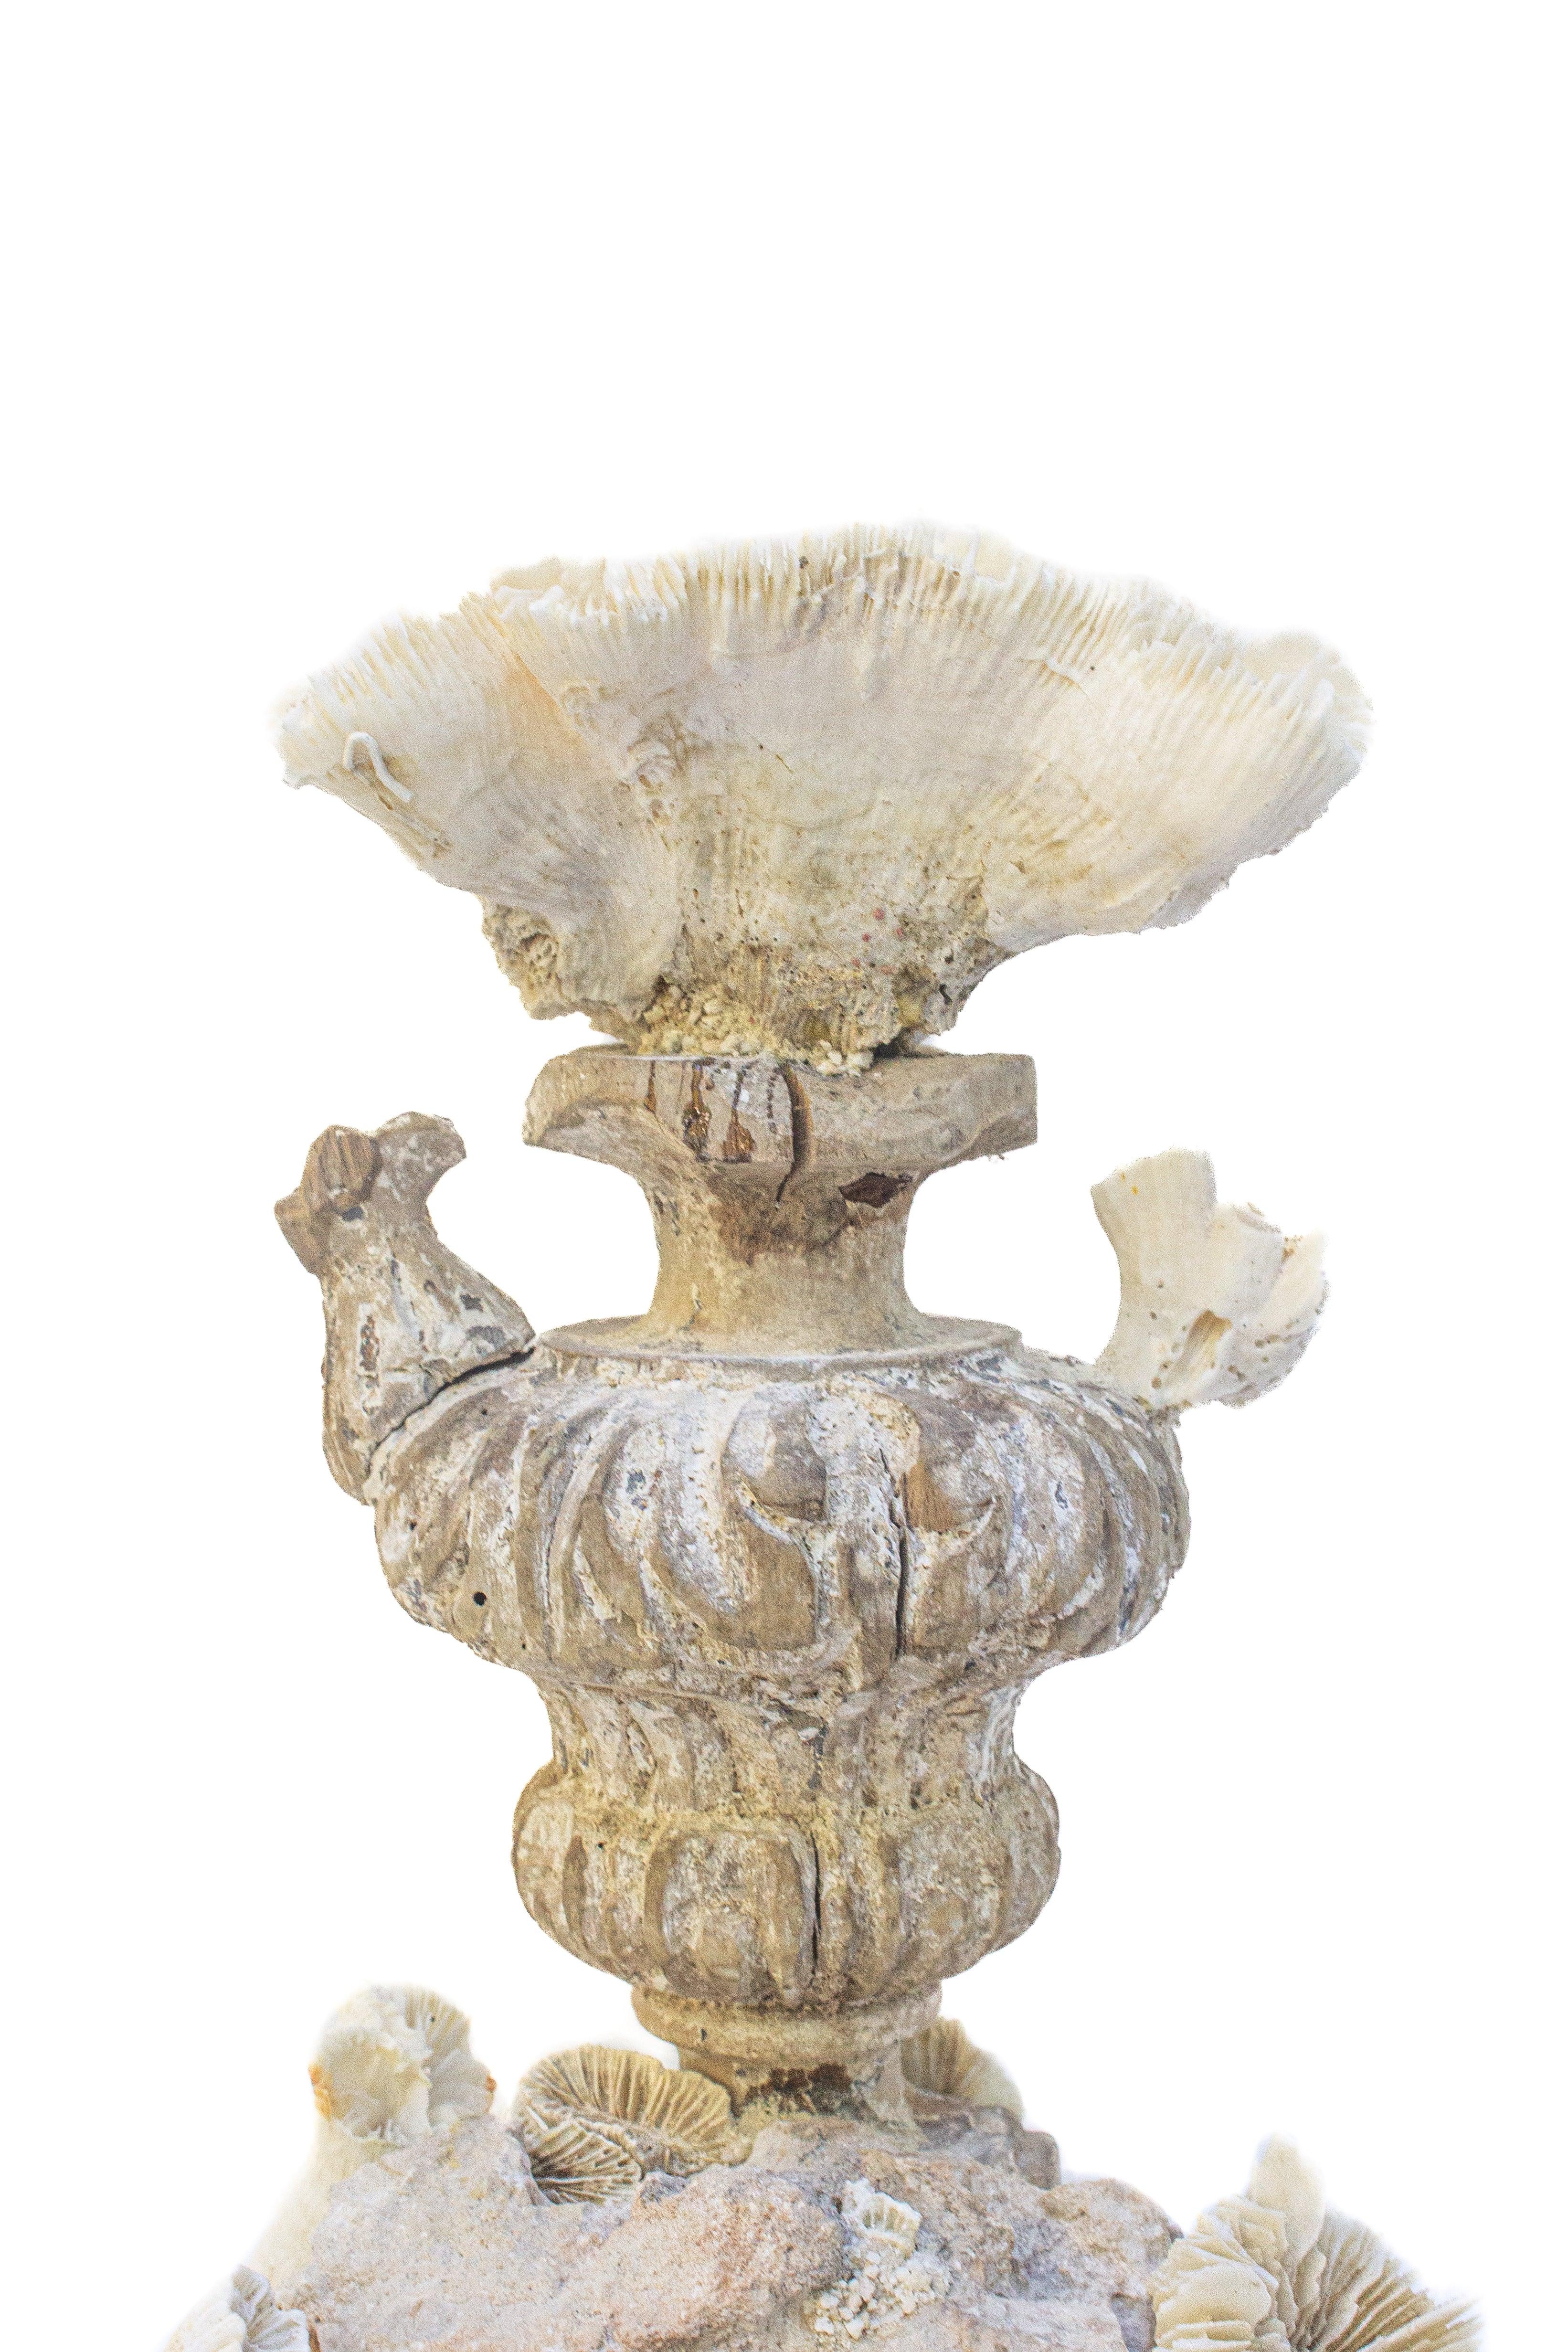 Rococo 18th Century 'Florence Fragment' with Fossil Coral on a Fossil Coral Cluster For Sale